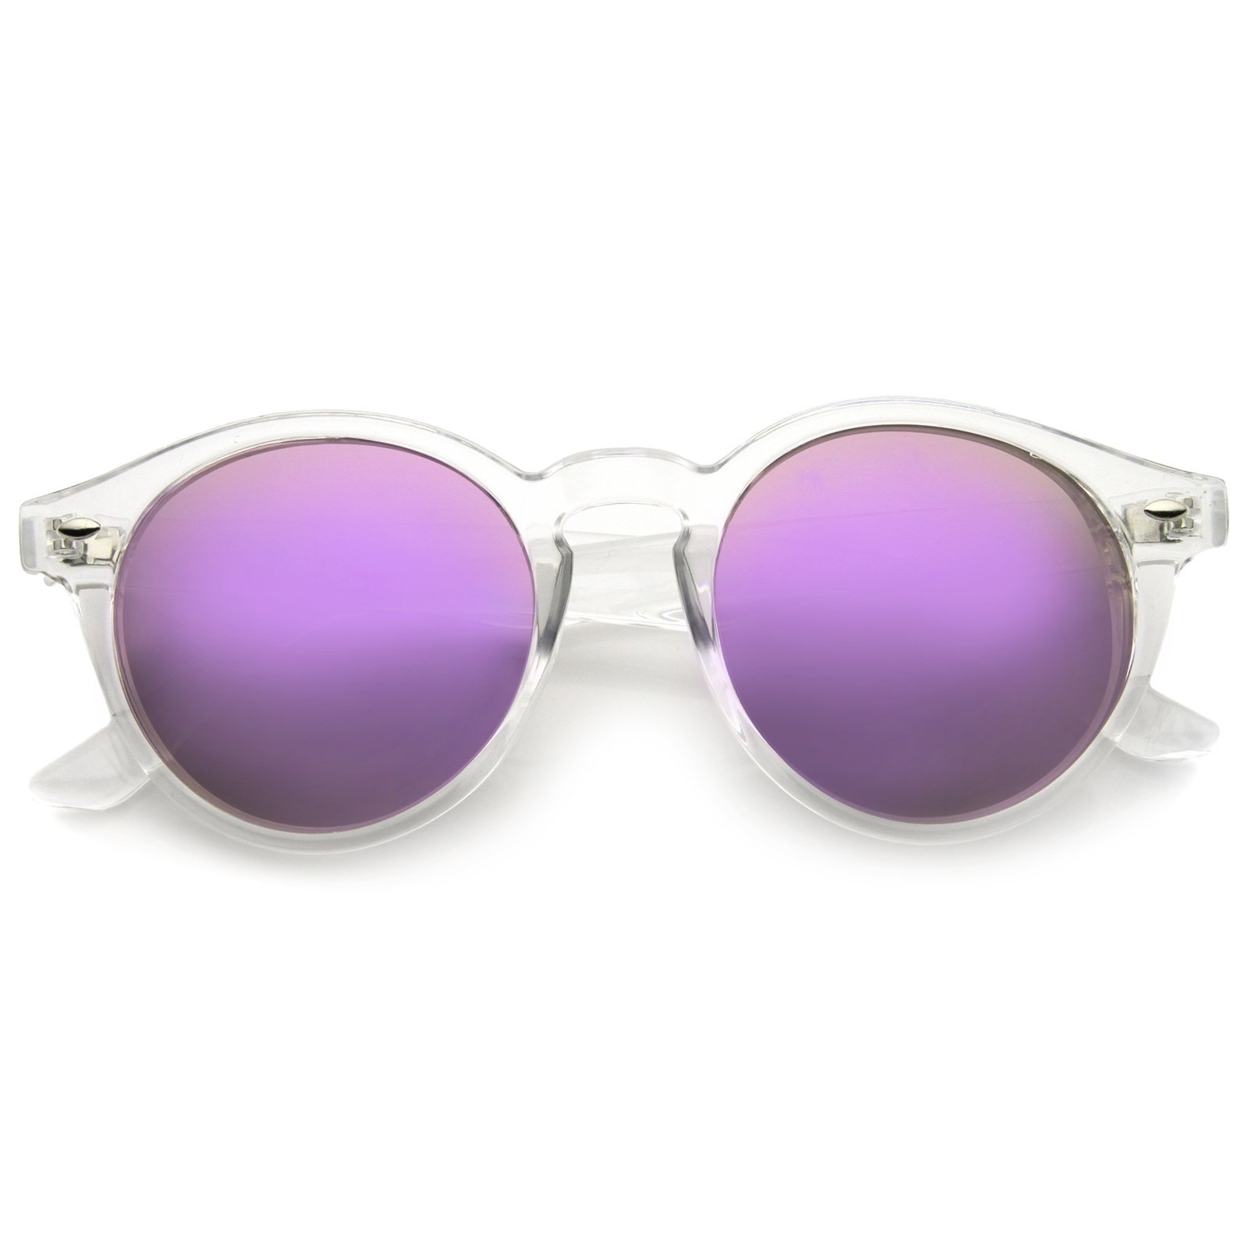 Retro Translucent Frame Color Mirror Lens Round Horn Rimmed Sunglasses 50mm - Clear / Purple Mirror